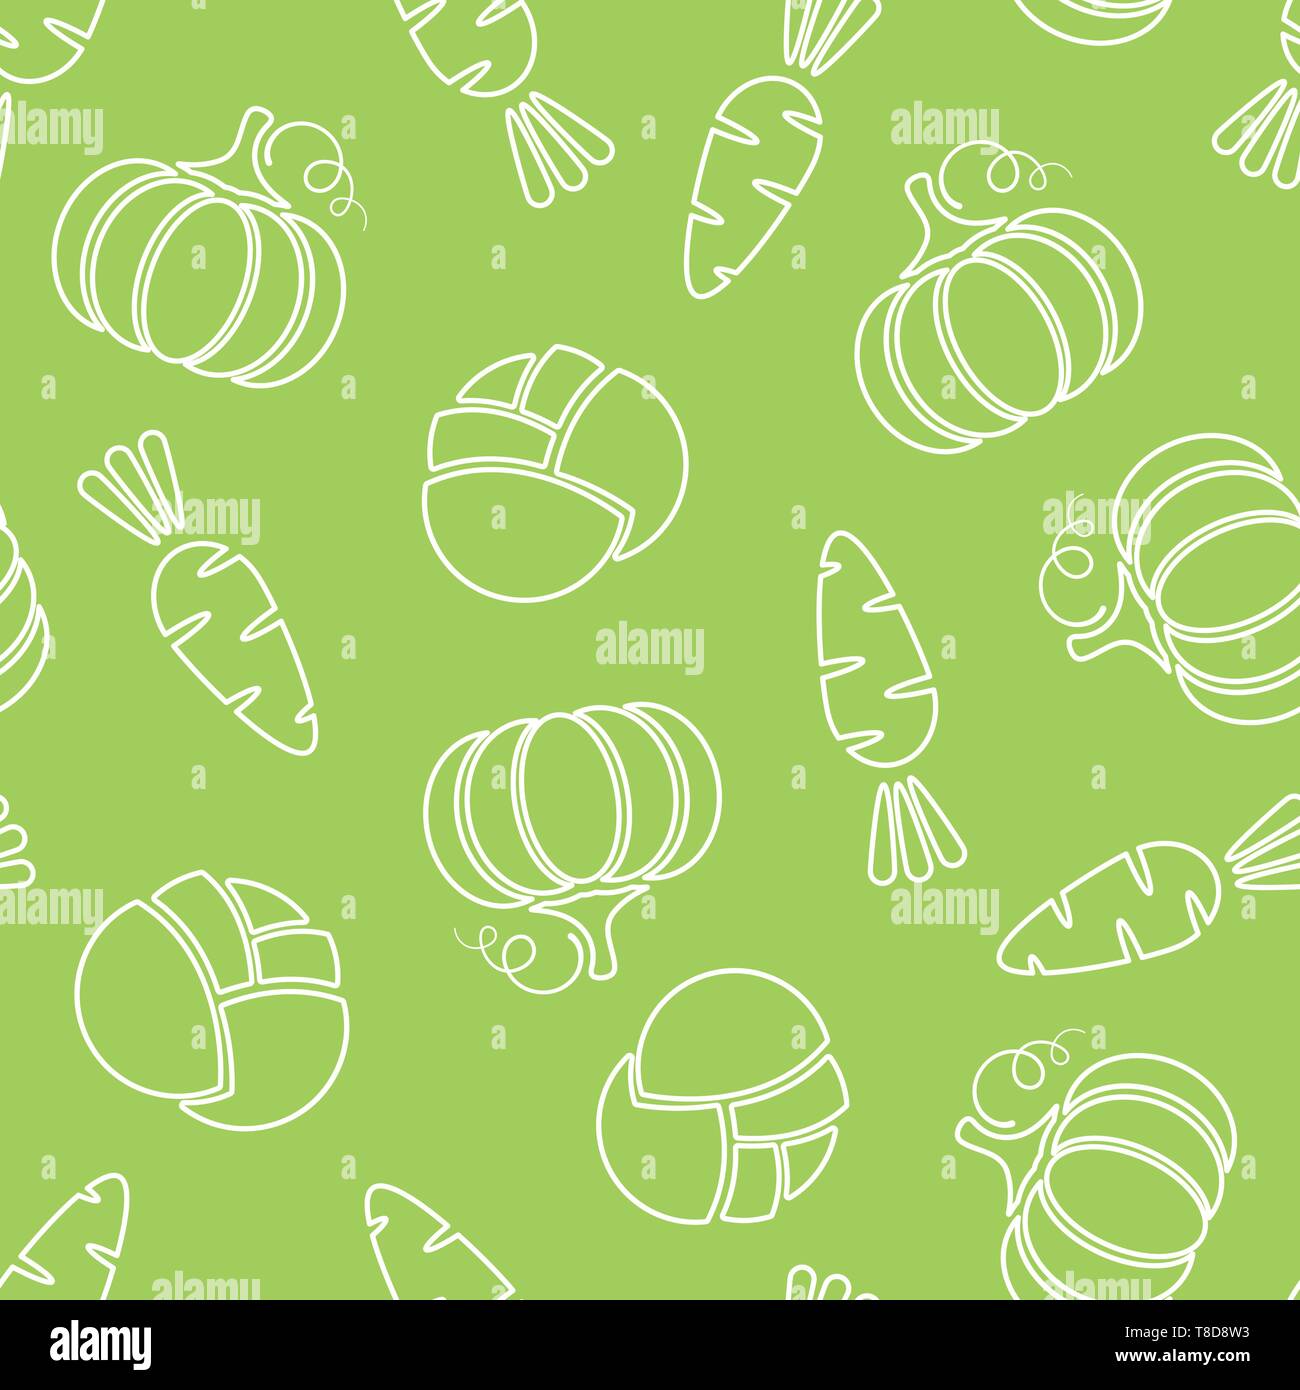 Seamless line vegetable pattern vector flat illustration. Modern seamless texture pattern design with vegetable silhouette in green and white colors for healthy diet decor or vintage wallpaper Stock Vector